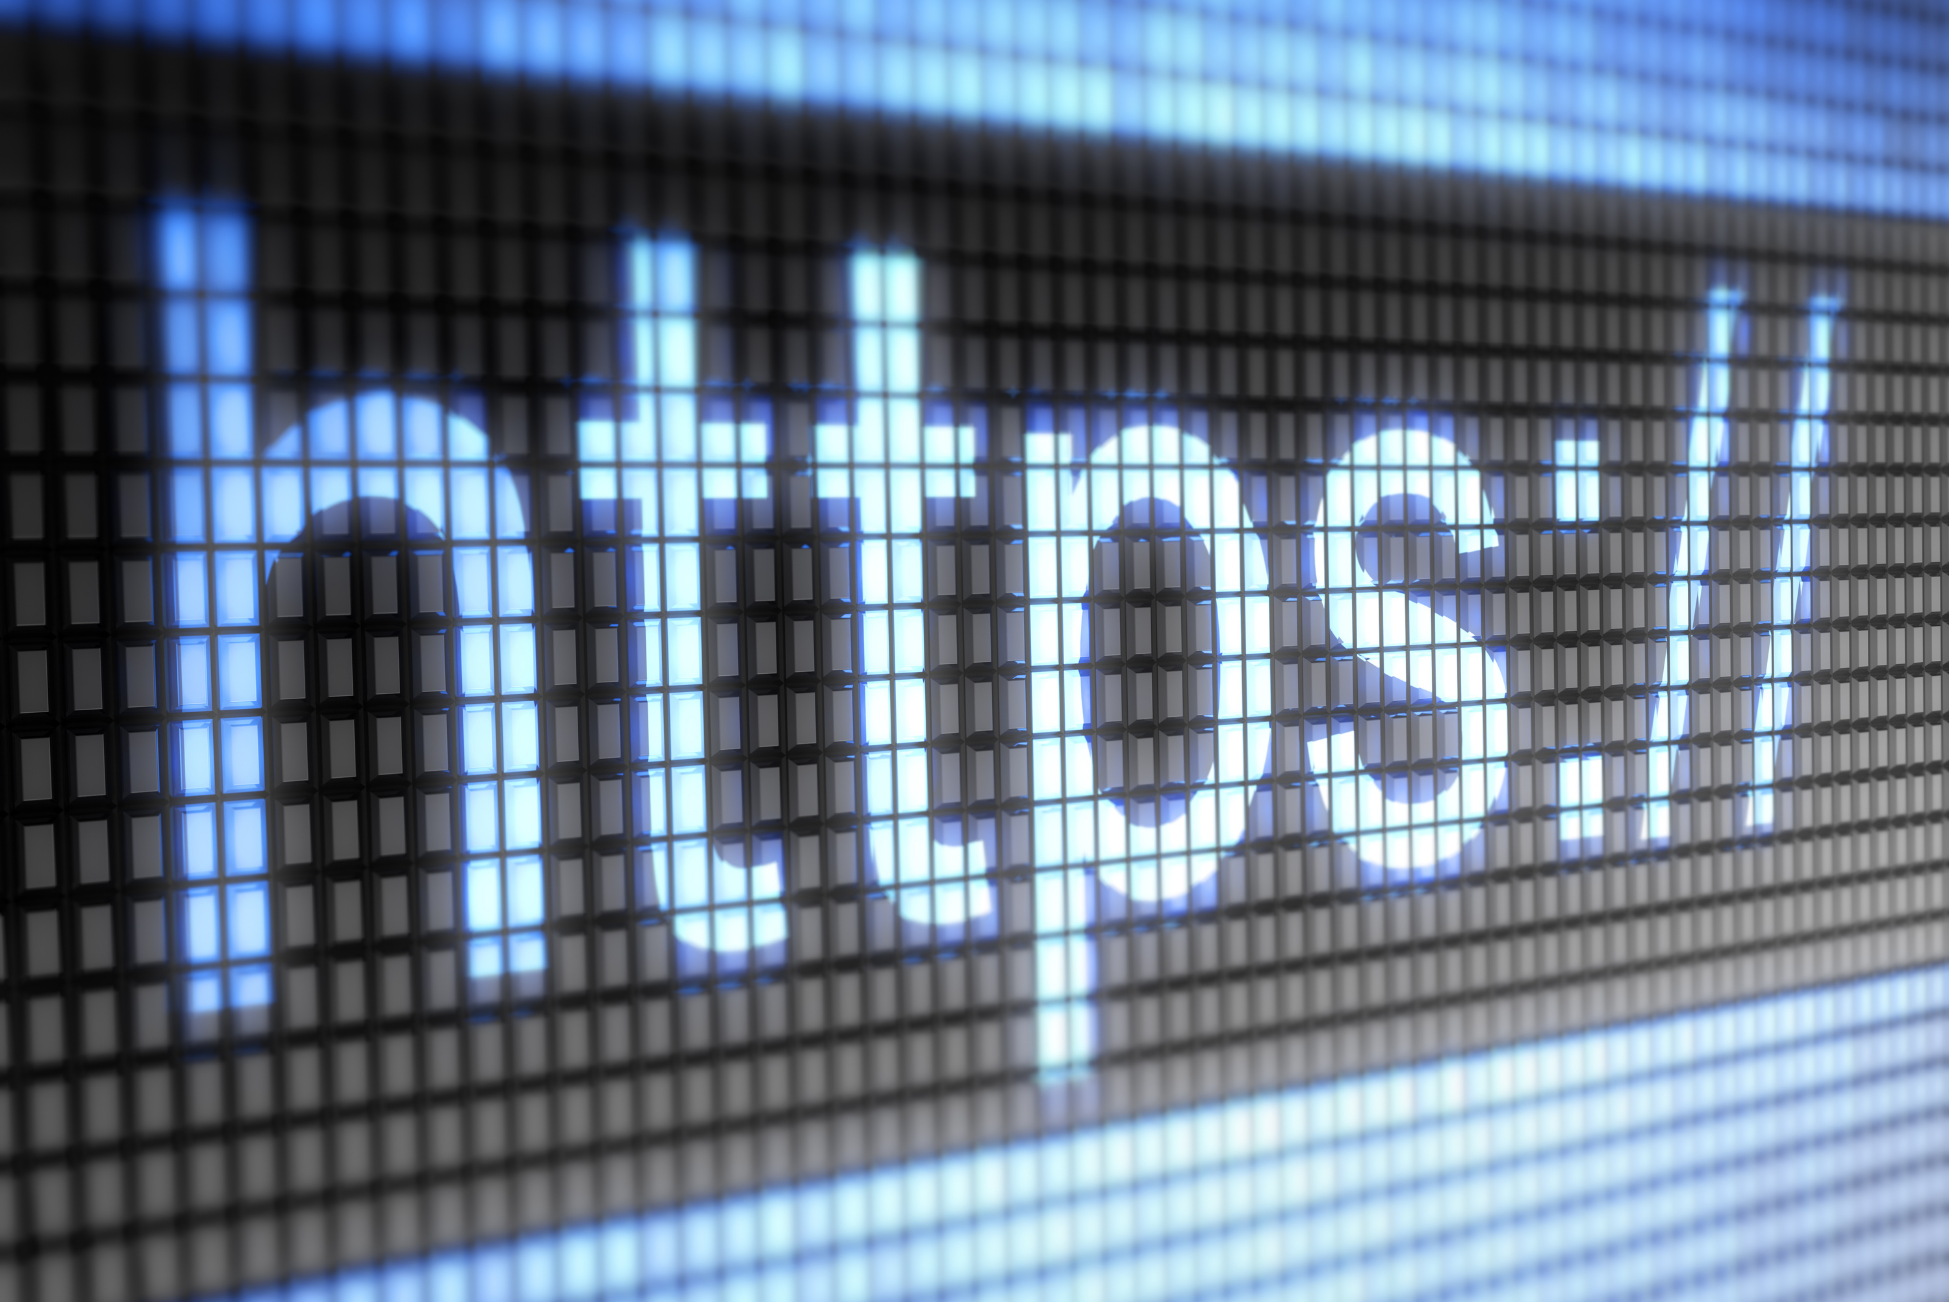 HTTPS always help secure your site